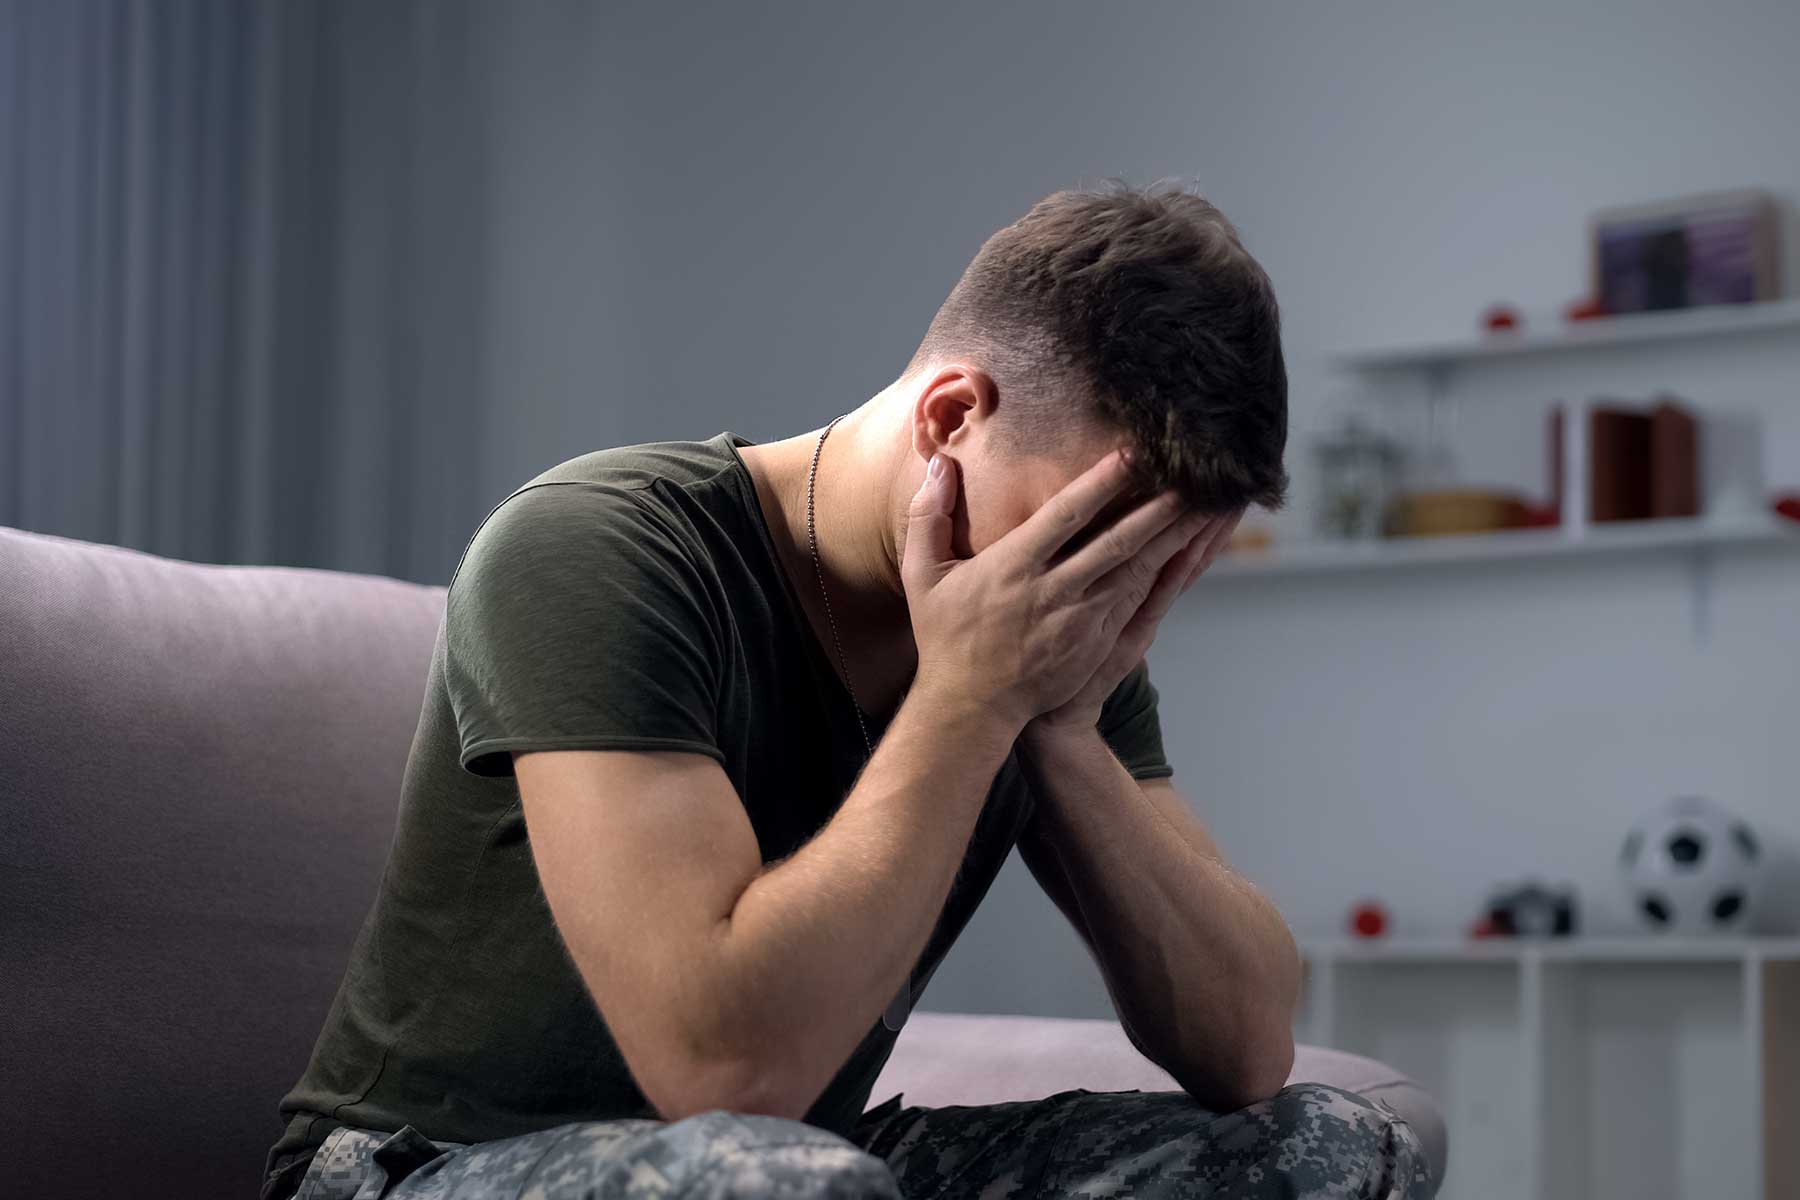 a man realizes he needs trauma therapy if he is going to overcome his ptsd symptoms